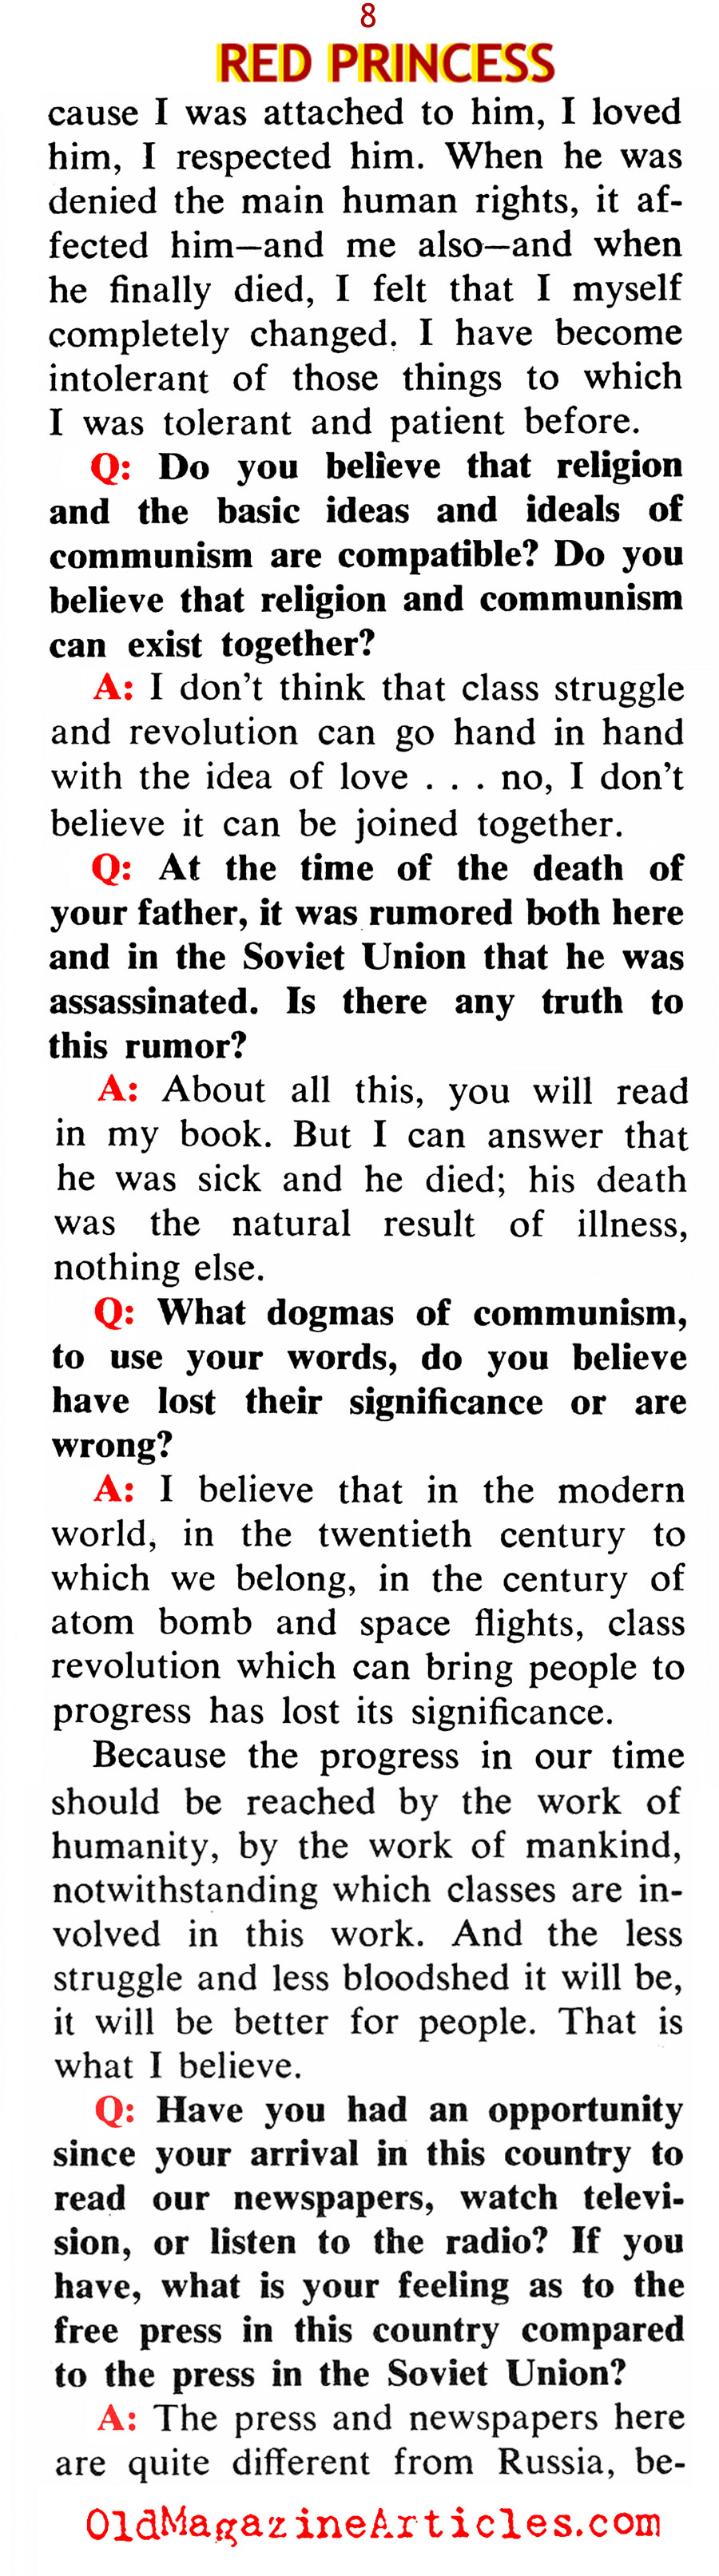 The Defection of Stalin's Daughter (Coronet Magazine, 1967)